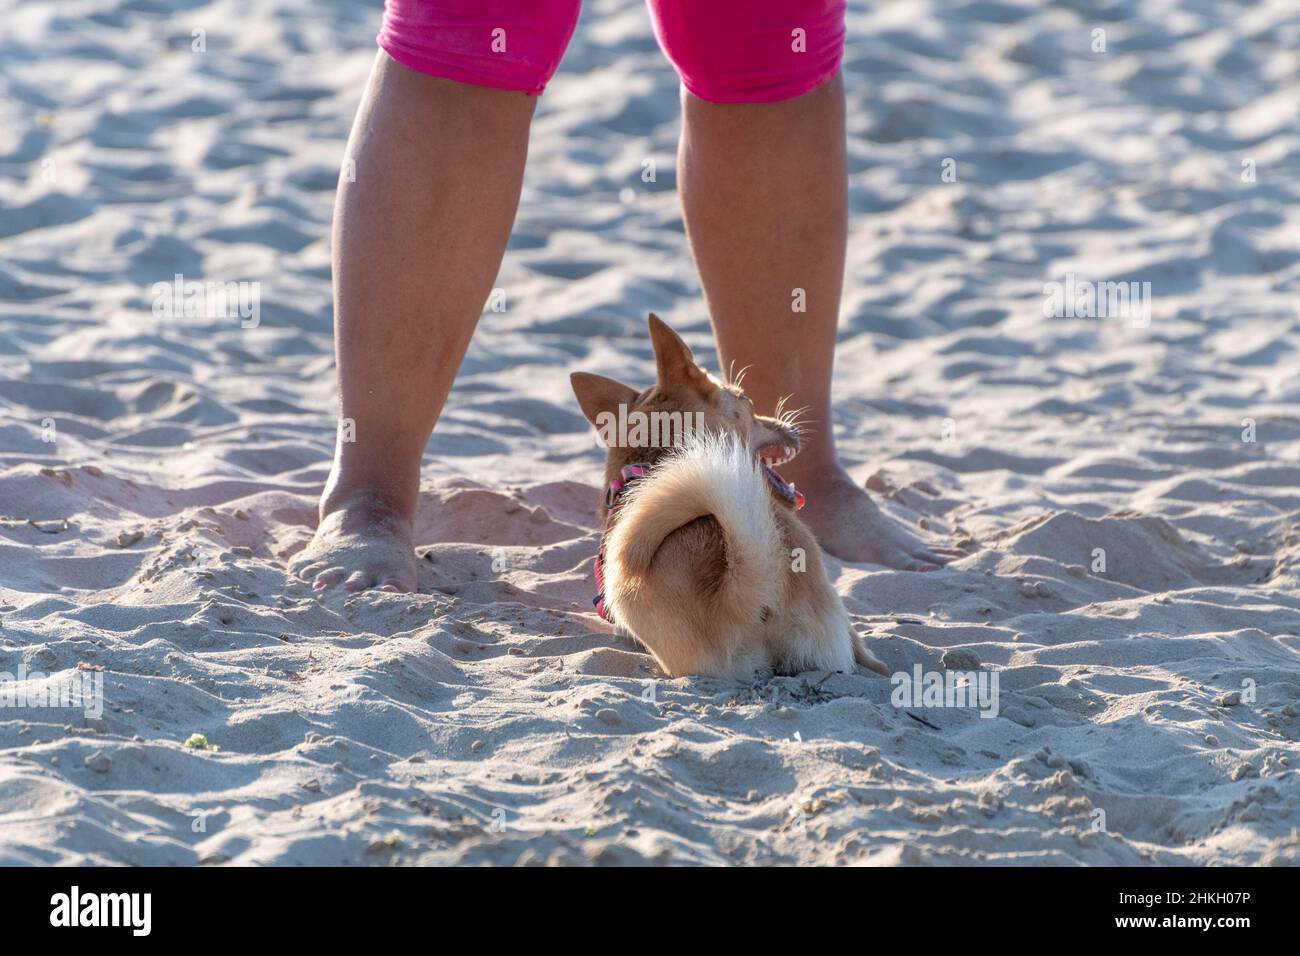 Dog sitting and crouching on the beach Stock Photo